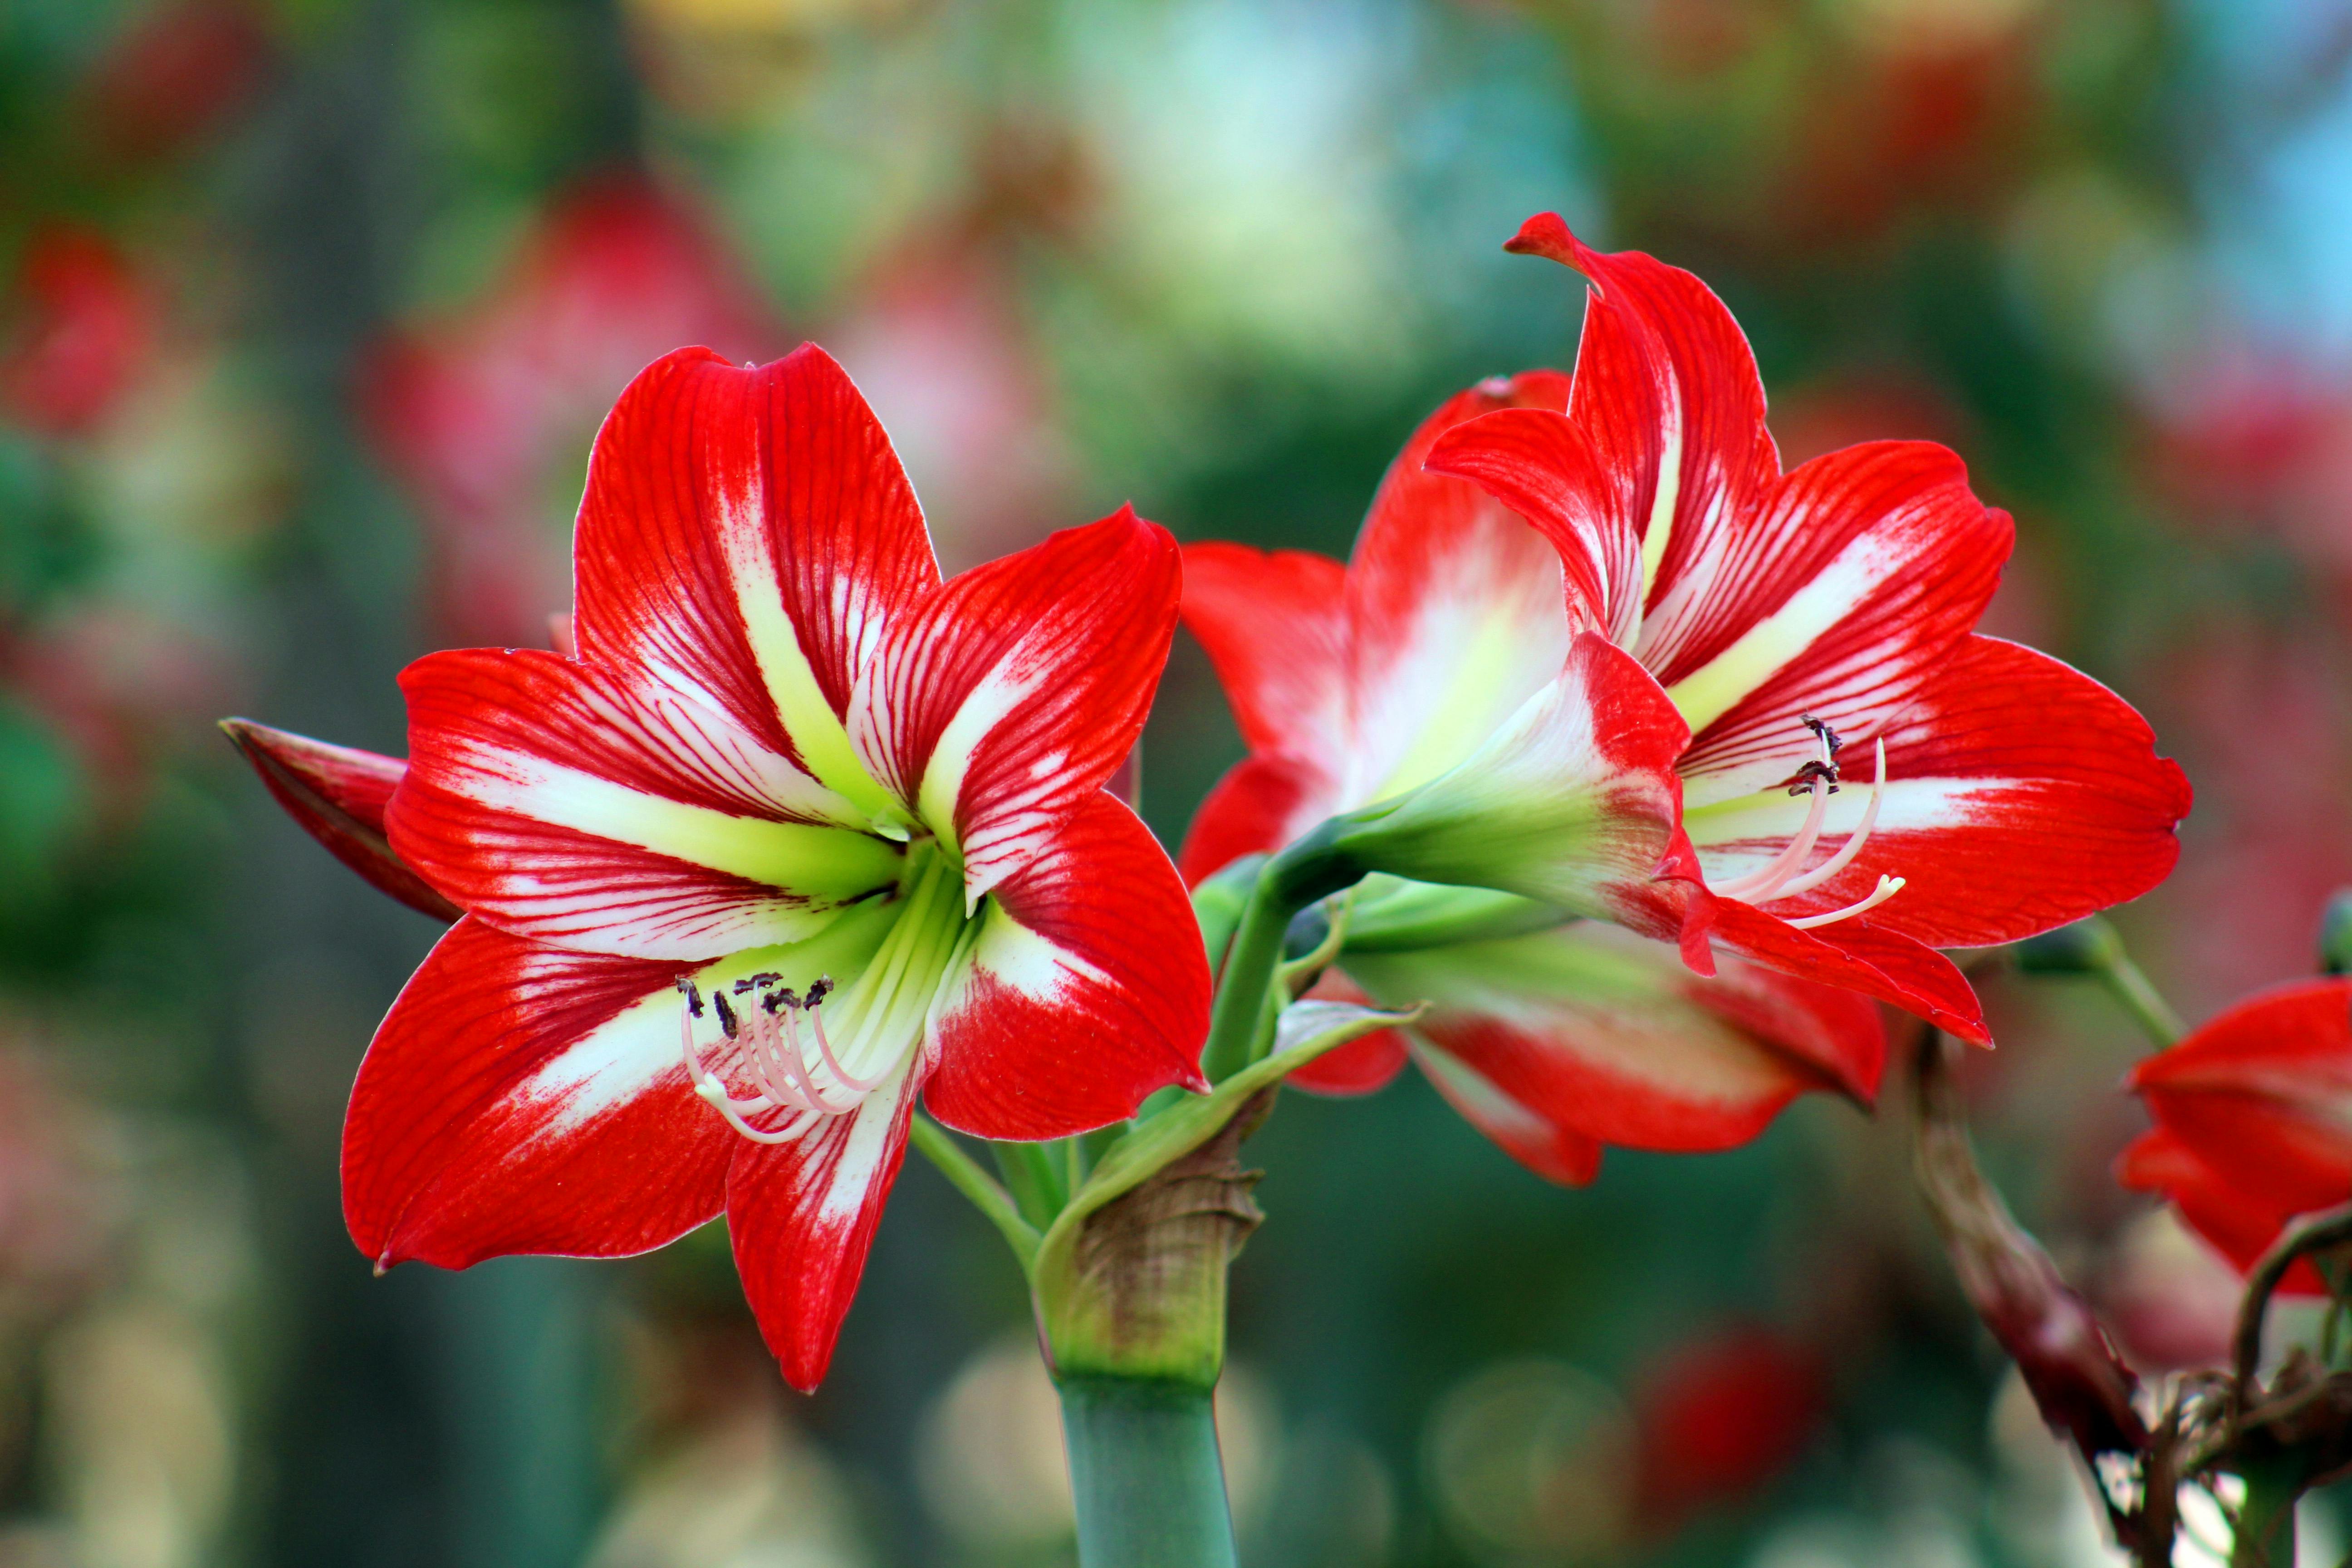 Bokeh Photo of White-and-red Flowers · Free Stock Photo